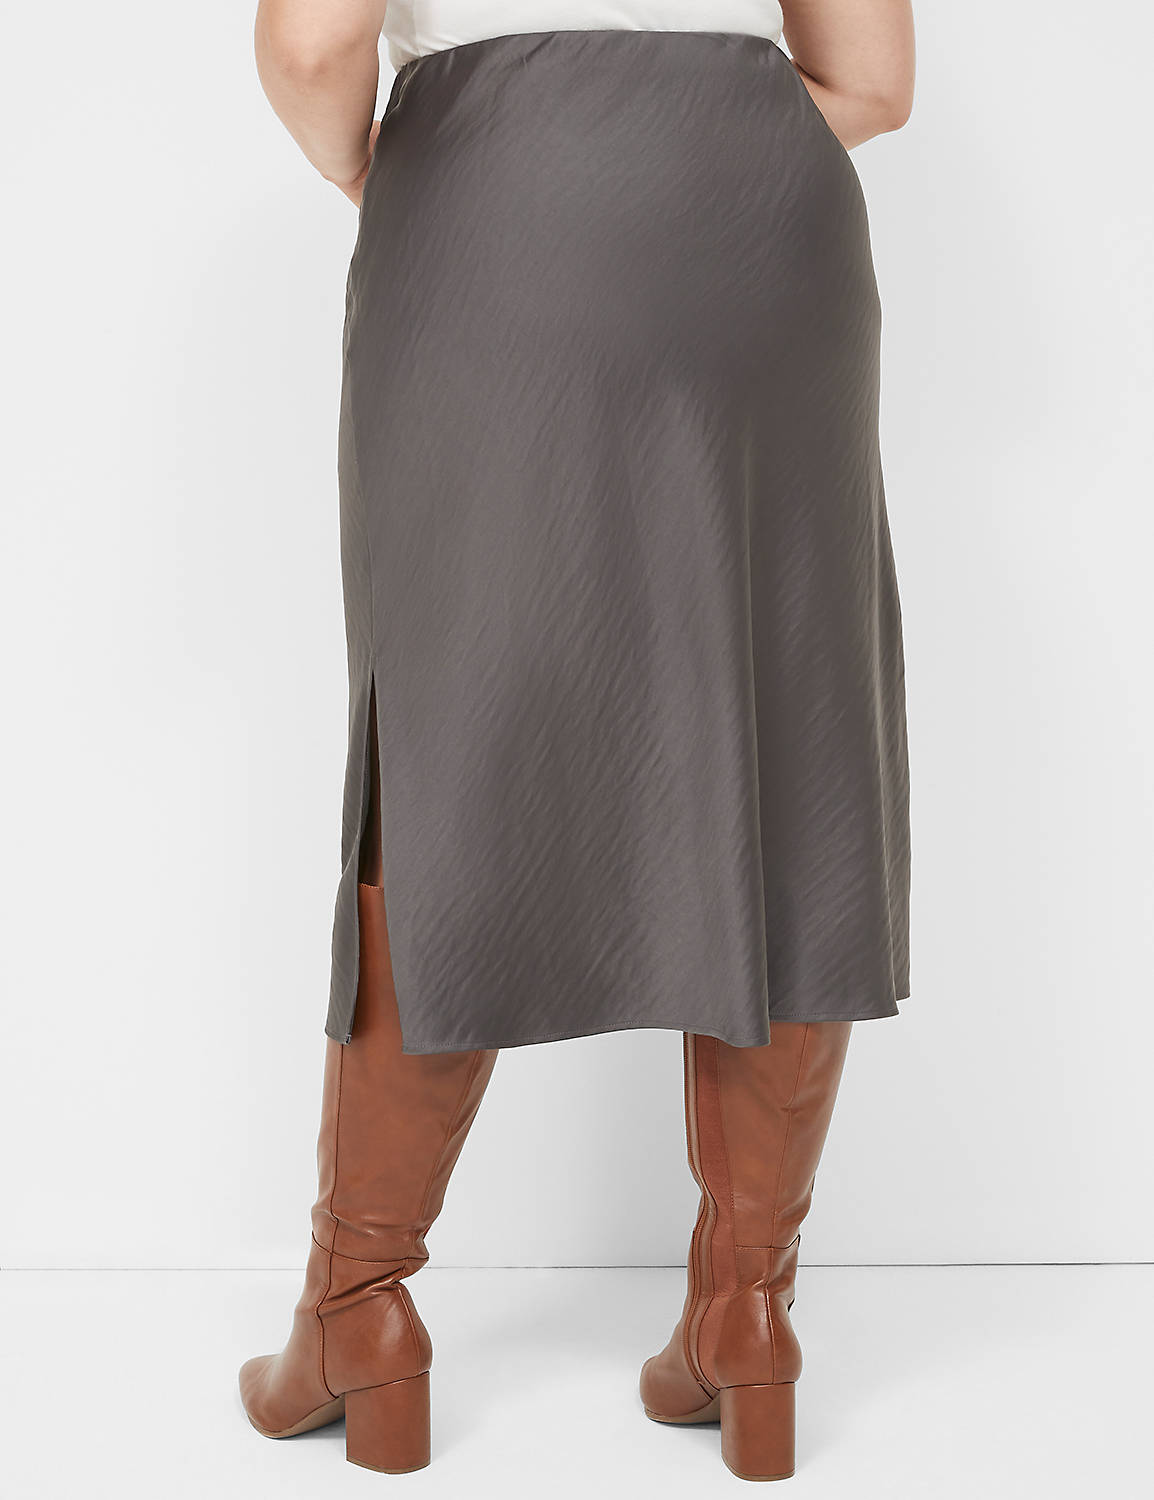 Bias-Cut Slip Satin Skirt with Side Product Image 2